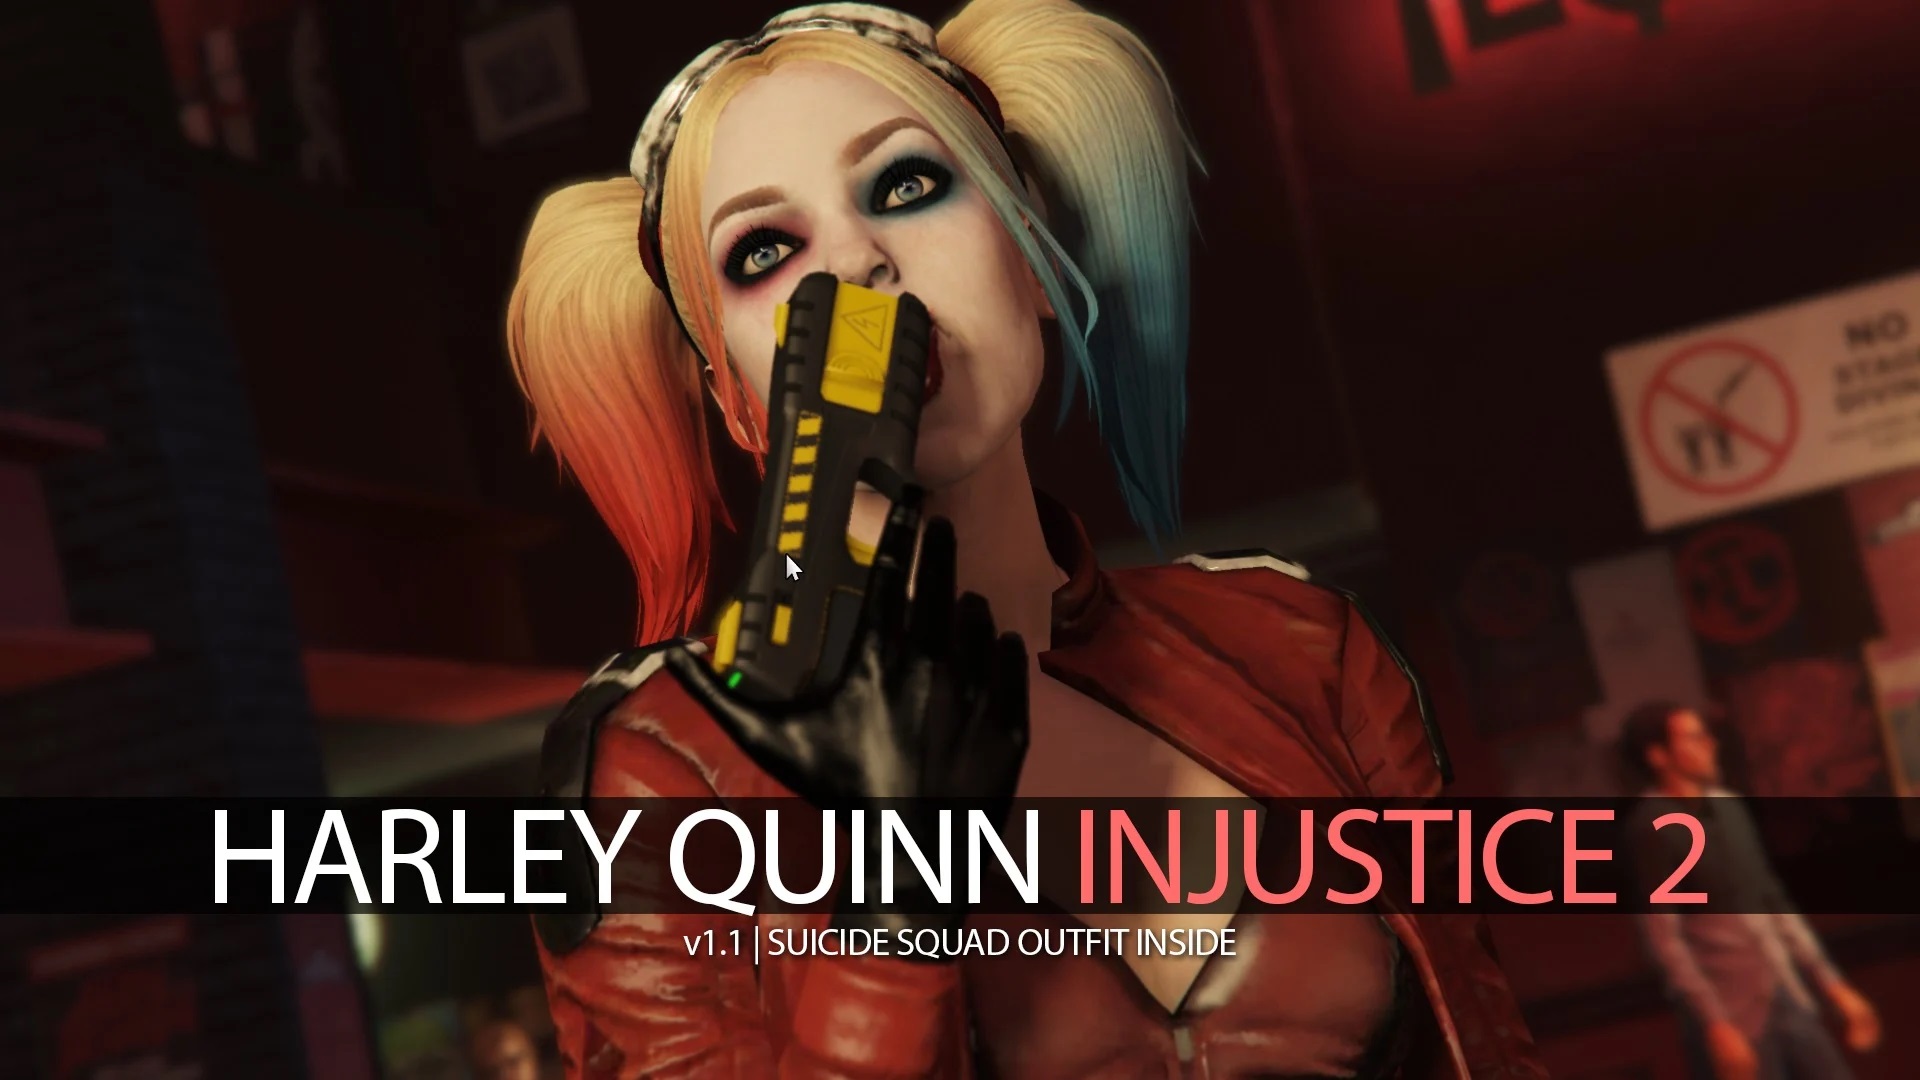 Harley Quinn Injustice 2 [Add-On Ped | Replace] v1.1